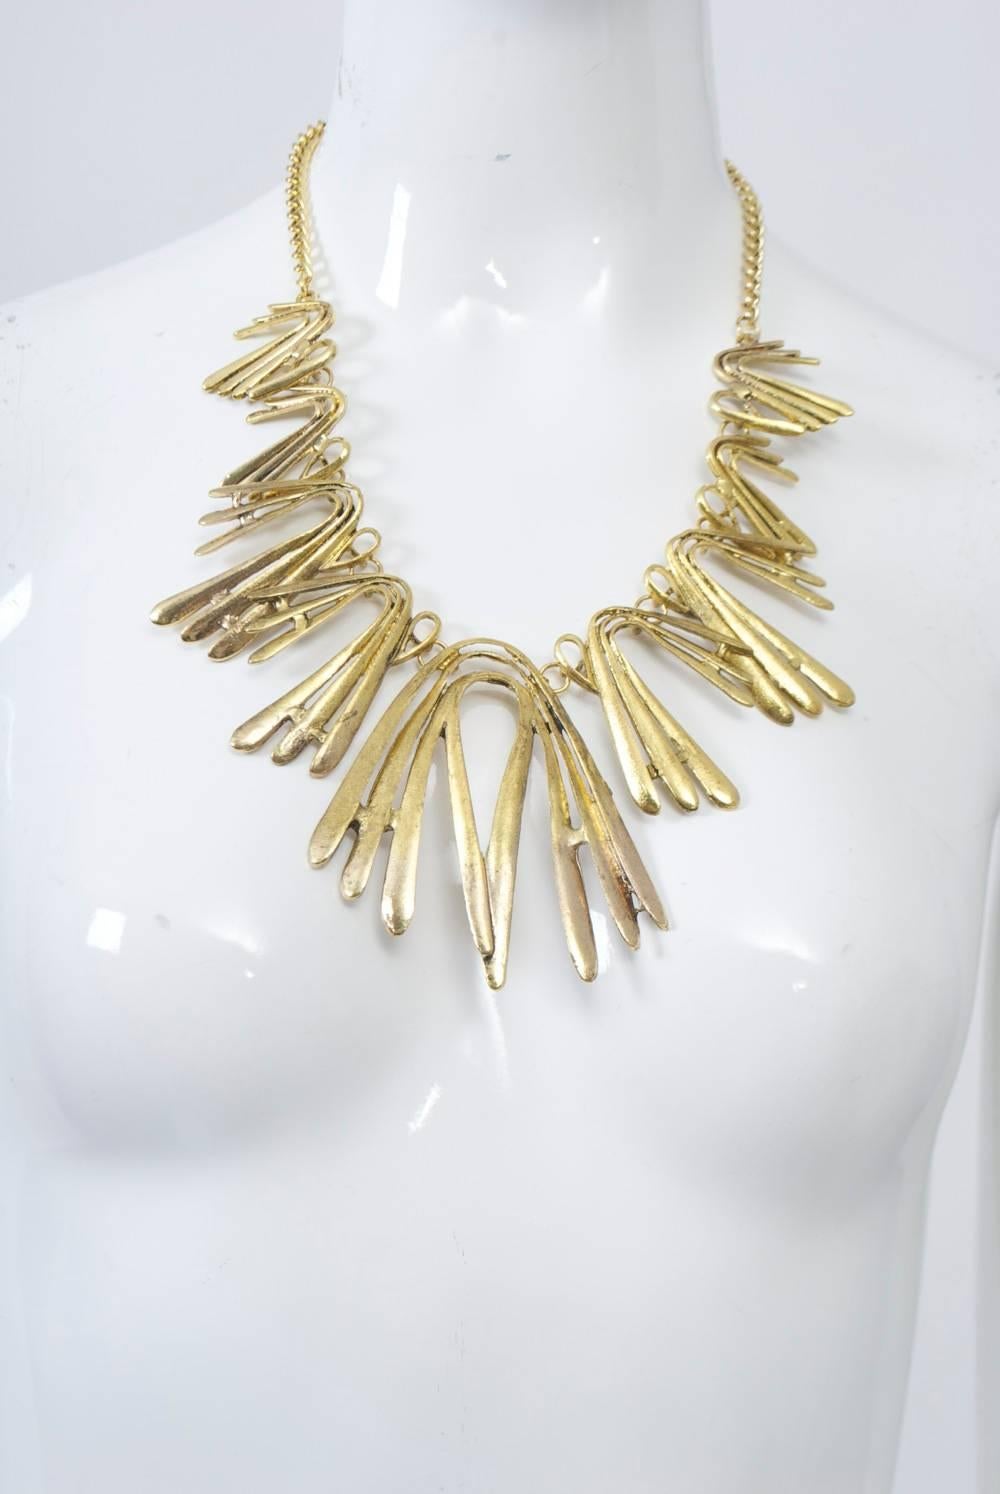 Gold tone necklace composed of boomerang-shaped components in graduated sizes is attributed to Oscar de la Renta, but unmarked. Chain in back is adjustable. Great statement necklace. Central element measure 3.5